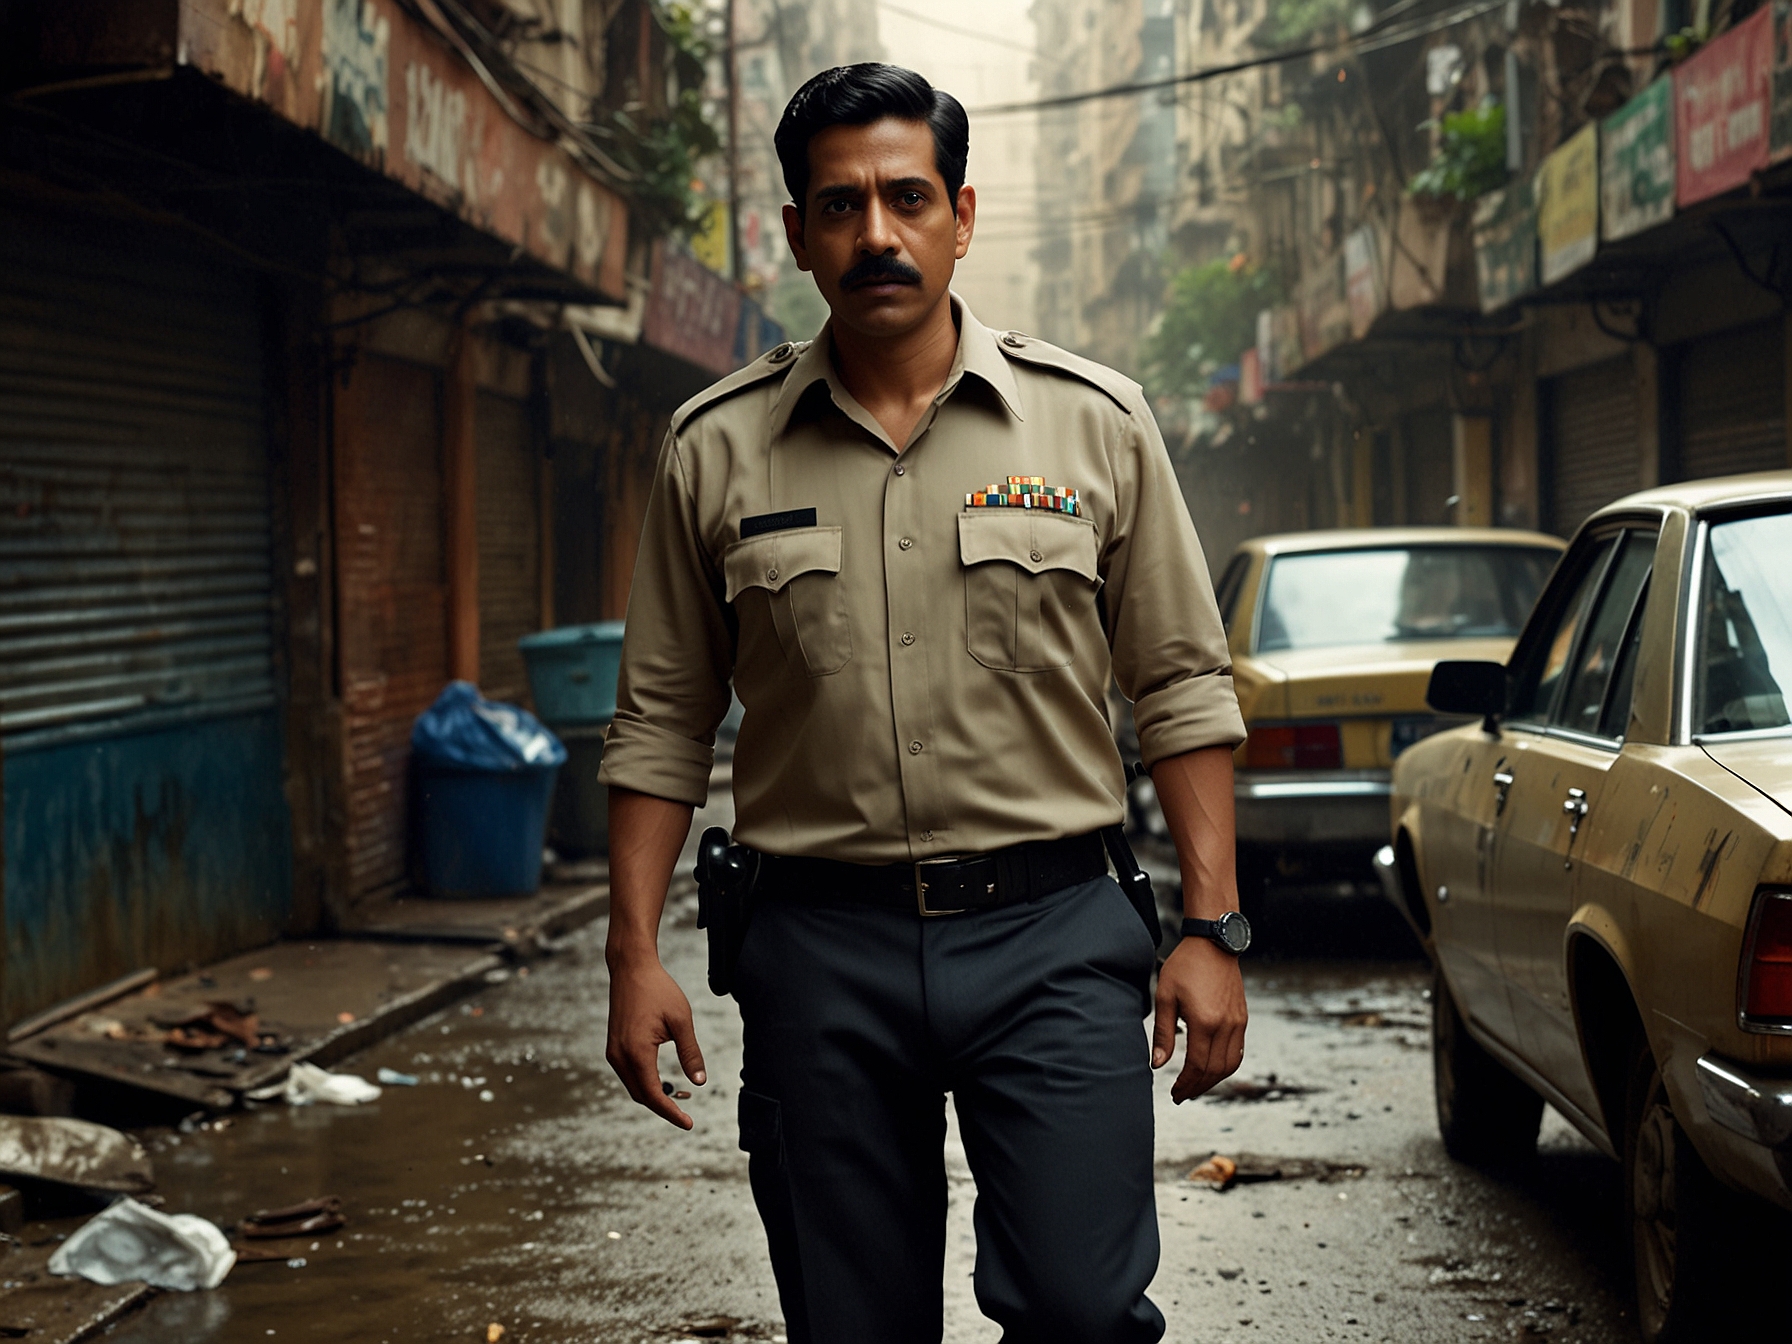 A tense moment as Inspector Vijay Rathore, played by Gulshan Devaiah, investigates a crime scene in the gritty streets of Mumbai, setting the stage for the thriller.